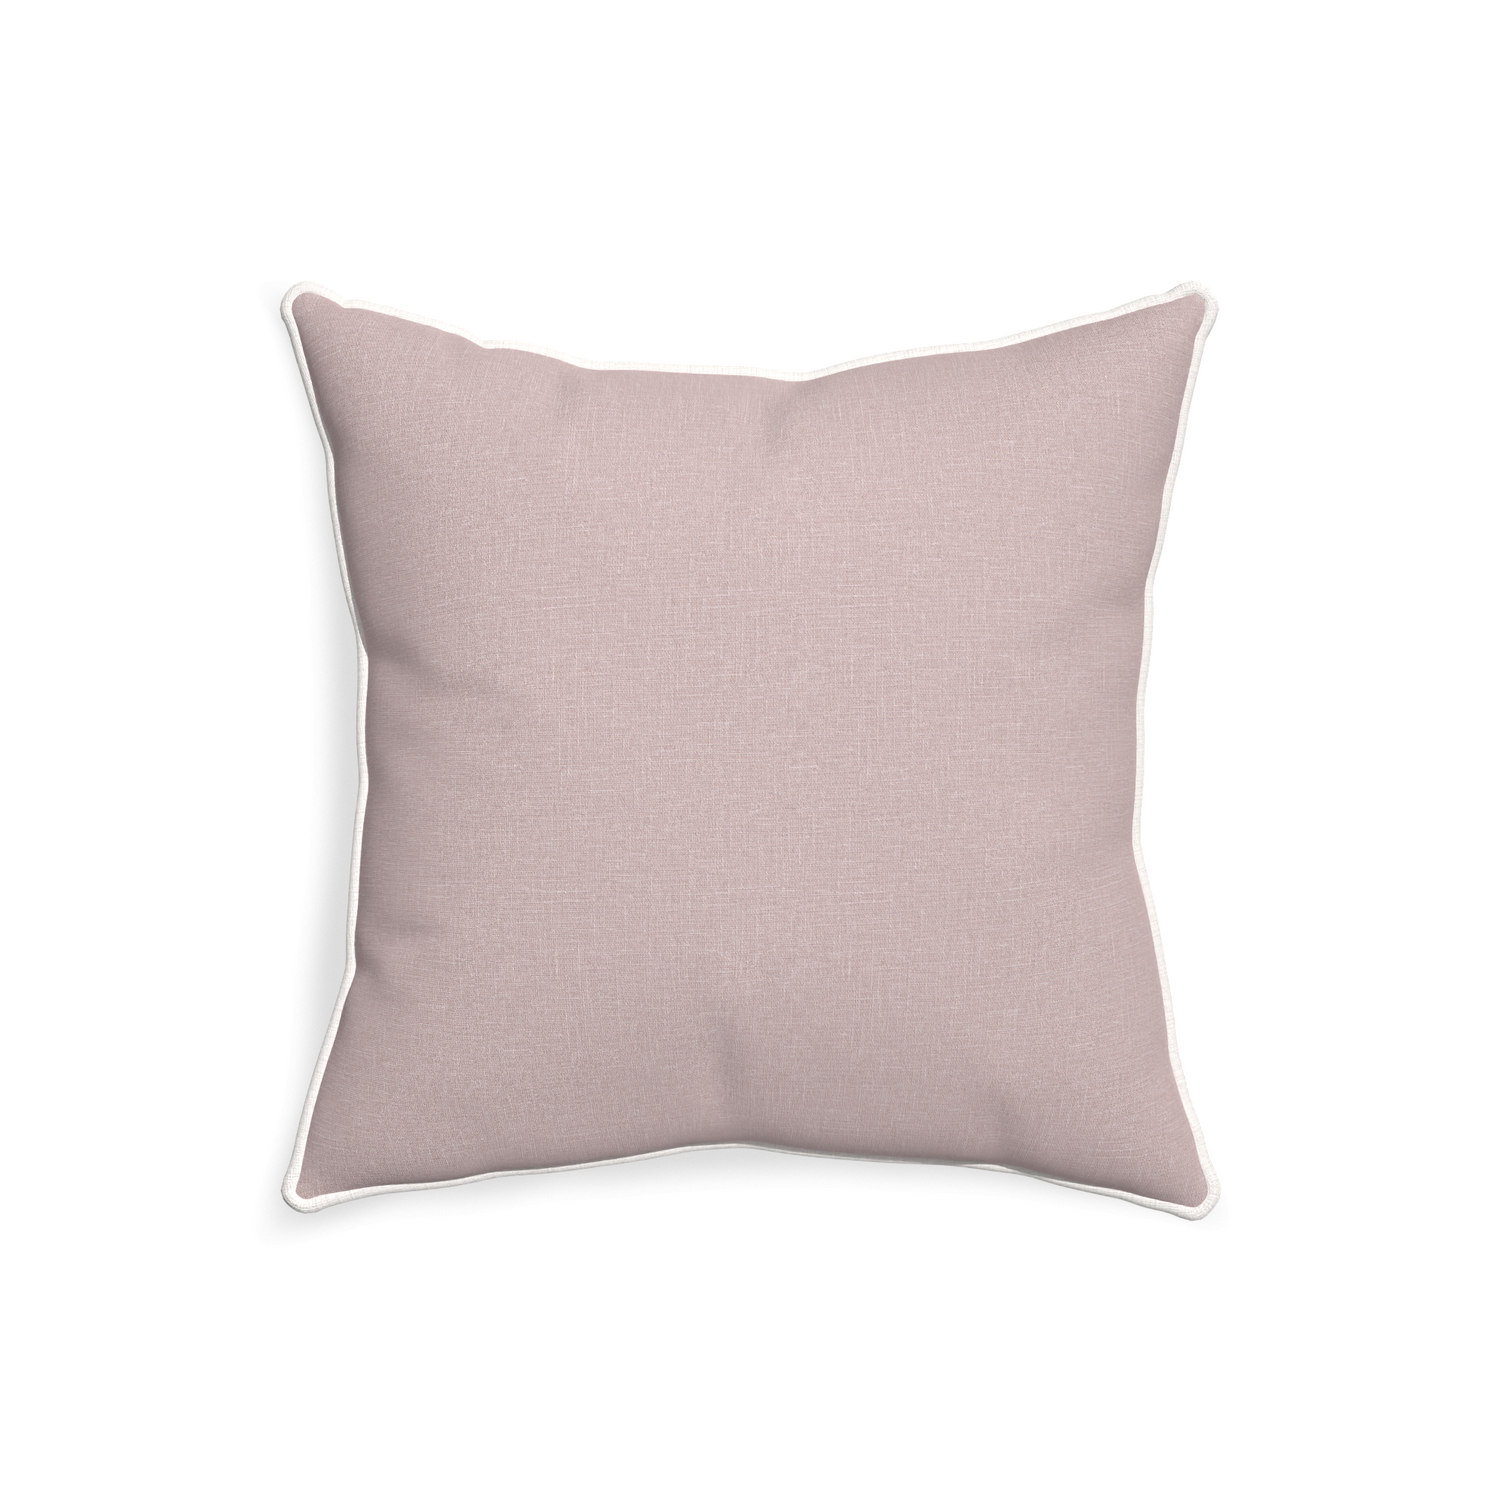 20-square orchid custom mauve pinkpillow with snow piping on white background